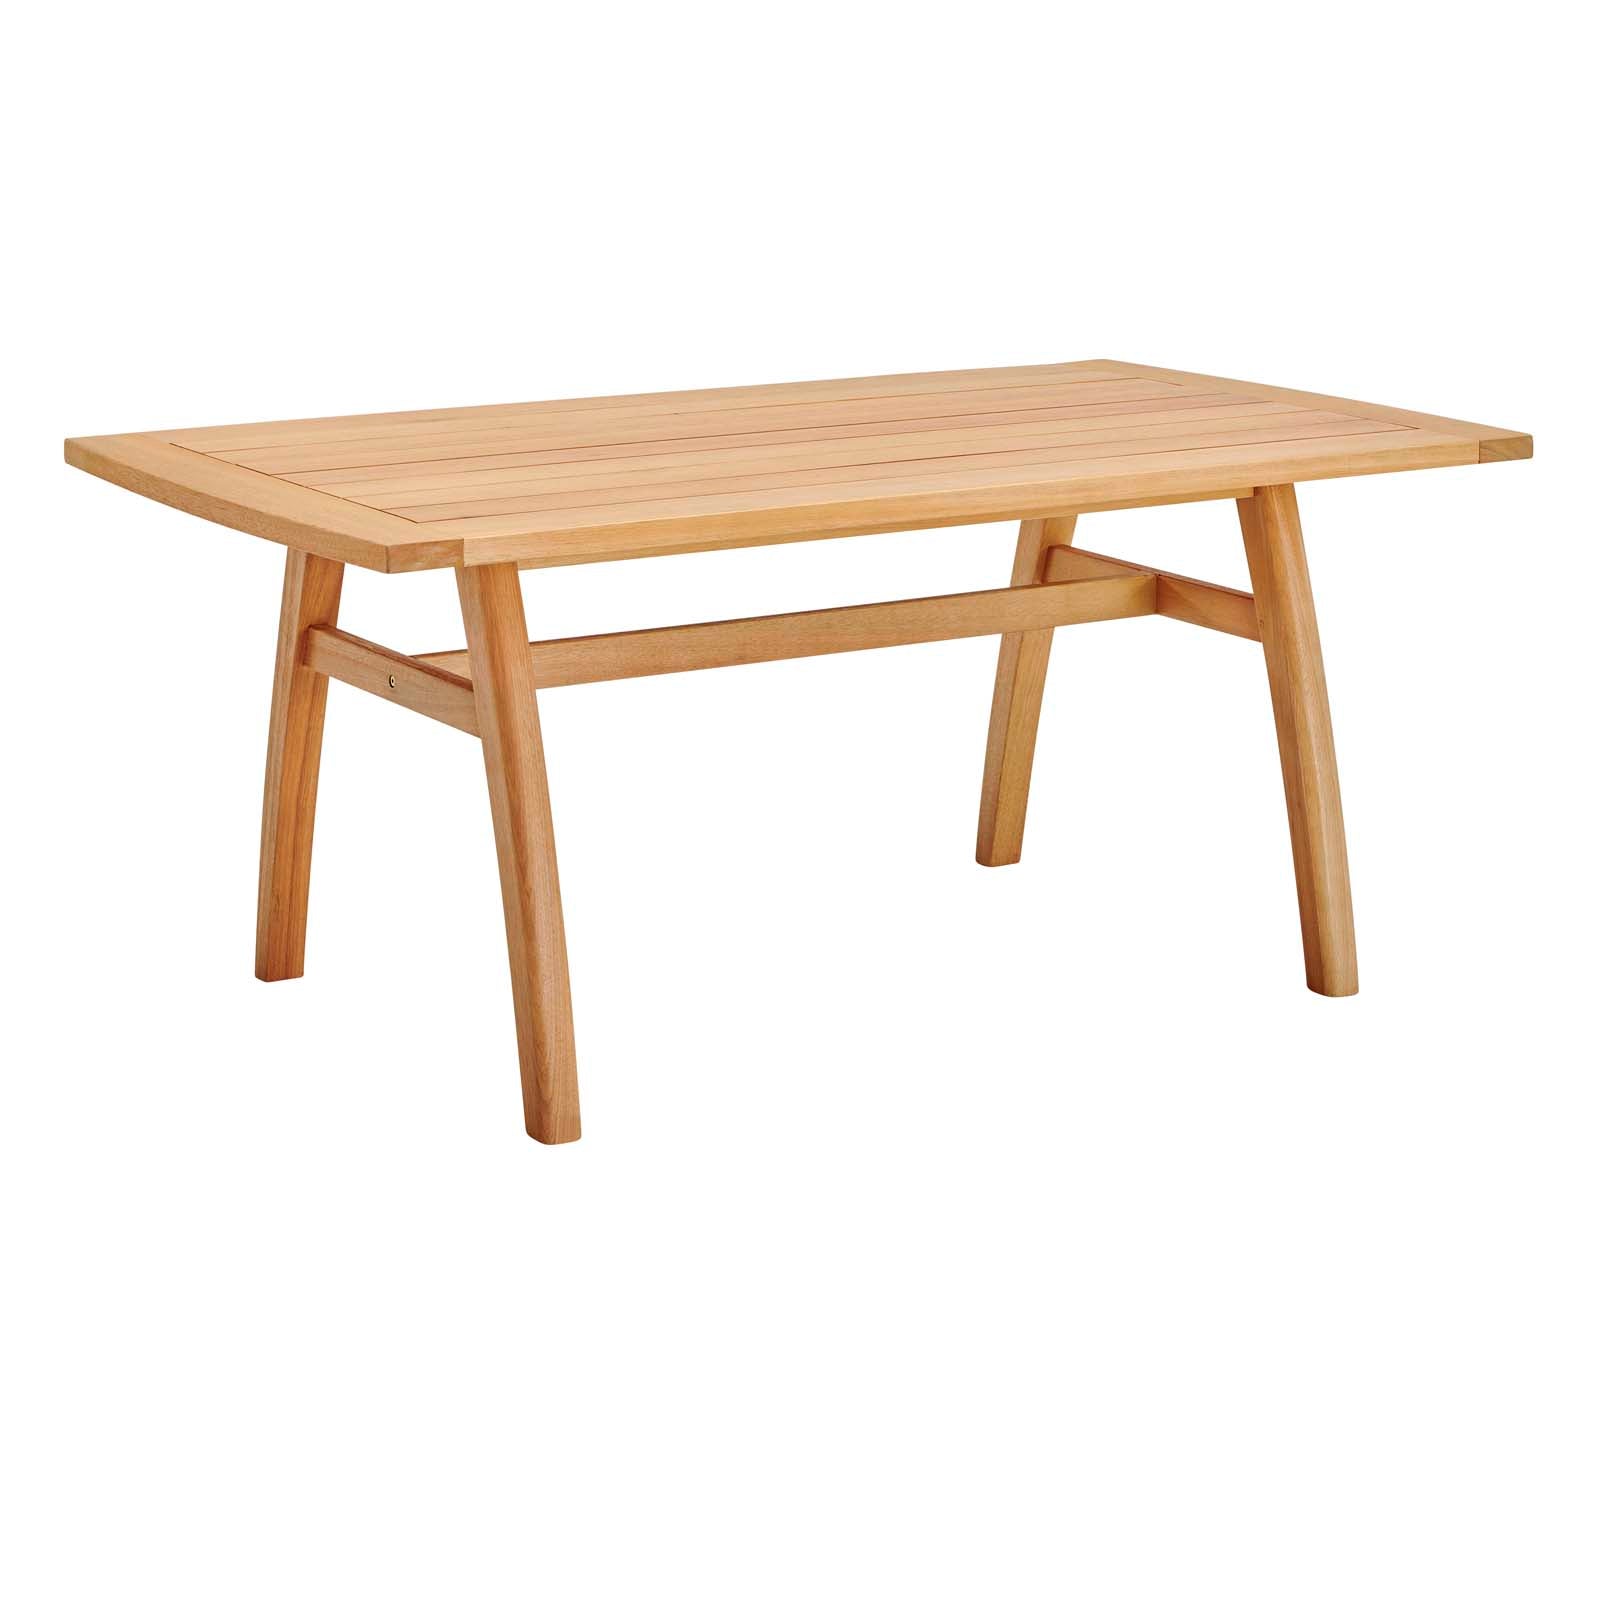 Orlean 57" Outdoor Patio Eucalyptus Wood Dining Table - East Shore Modern Home Furnishings